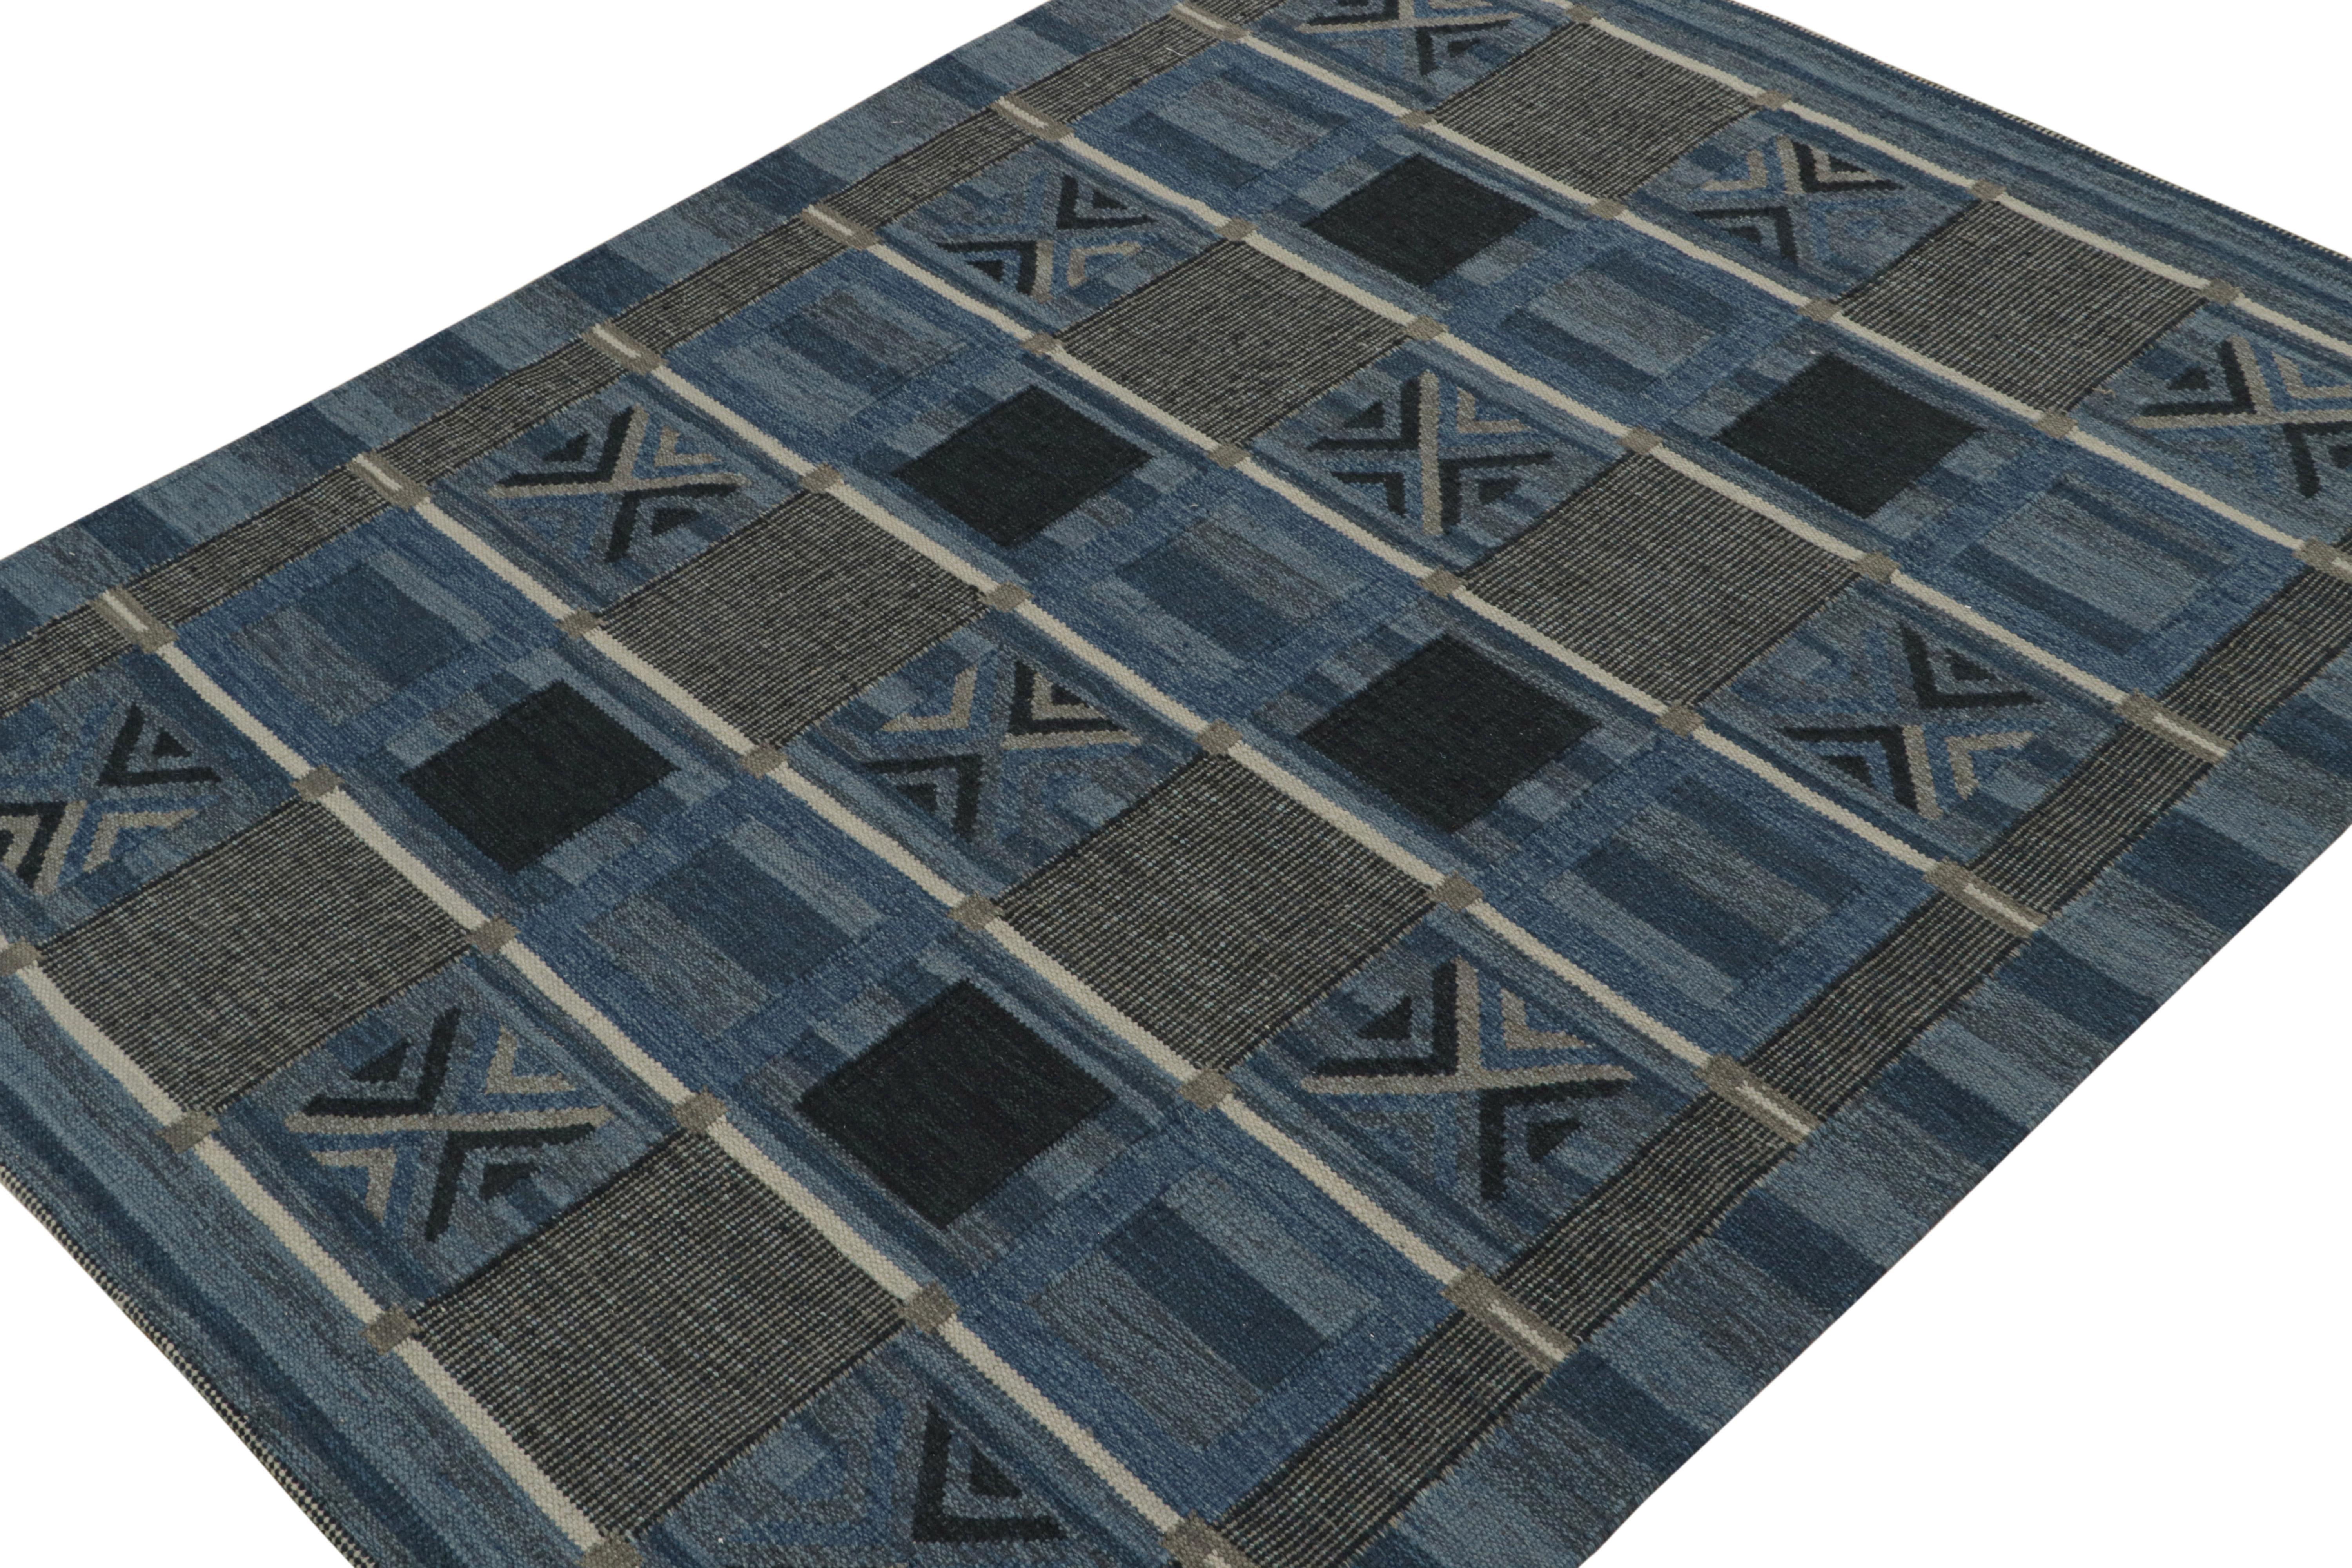 A smart 8x10 Swedish style kilim from our award-winning Scandinavian flat weave collection. Handwoven in wool, cotton & undyed natural yarns

On the Design: 

This rug enjoys geometric patterns in tones of blue & gray. Keen eyes will admire undyed,